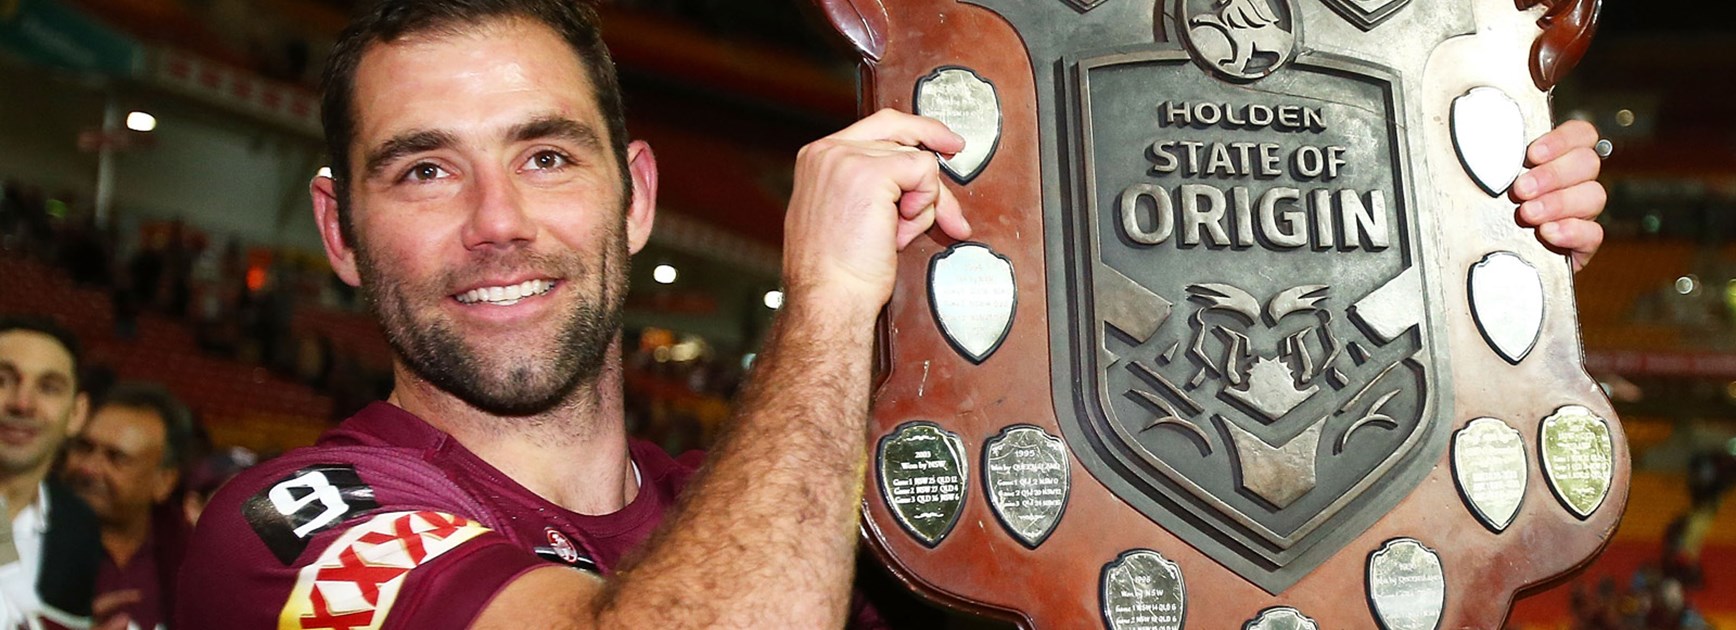 Cameron Smith holds the Origin shield following his side's win in the decider.